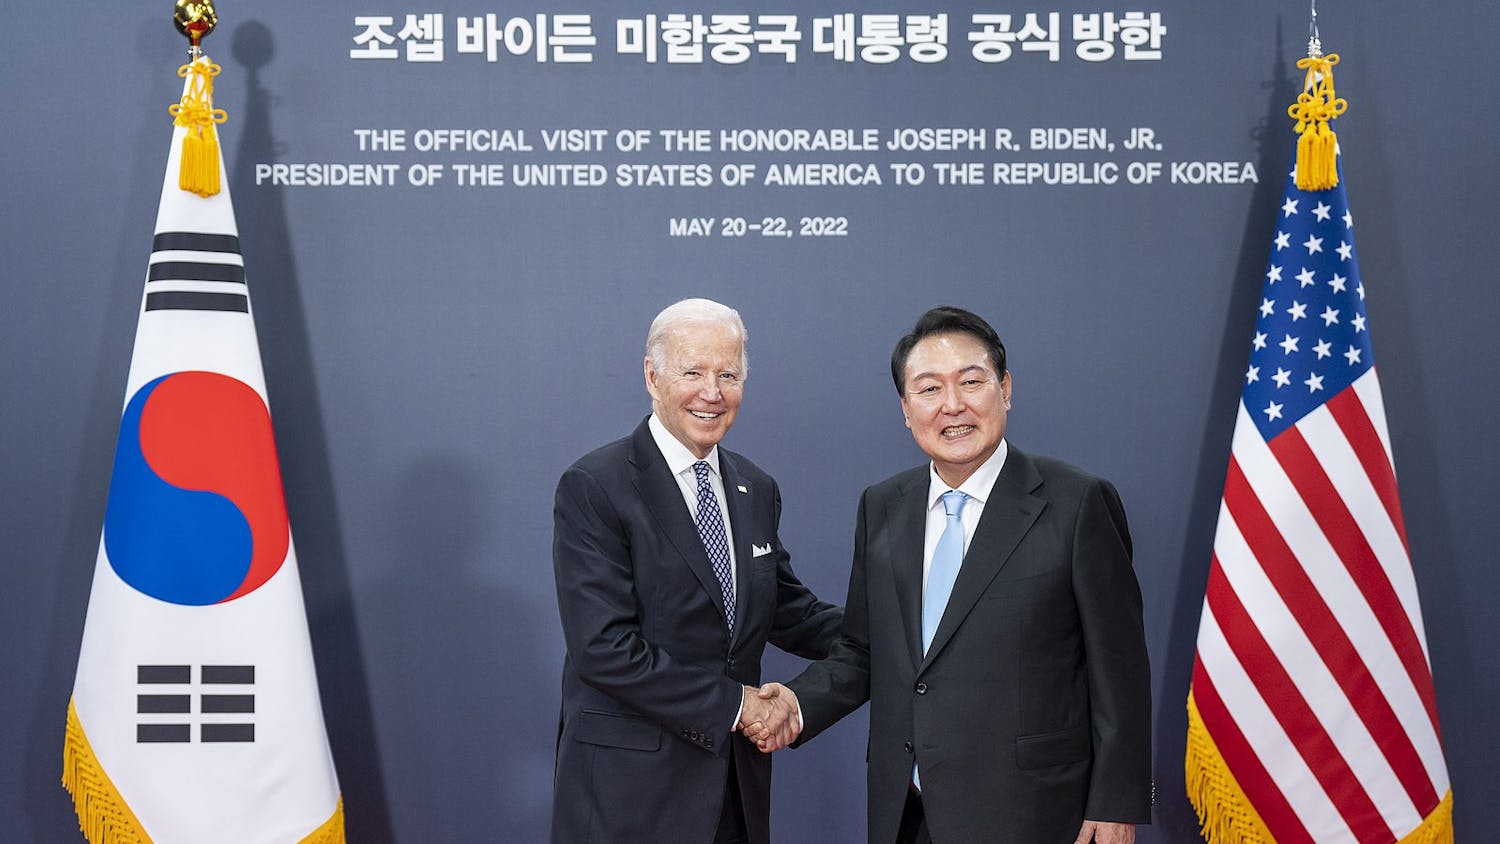 President Joe Biden welcomed South Korean President Yoon Suk Yeol and his wife, first lady Kim Keon Hee, to the White House for an official state visit (Photo courtesy of Wikimedia Commons/“President Biden met with President of South Korea Yoon at the Presidential Office in Yongsan 2022” by Office of the President of the United States. May 21, 2022). 